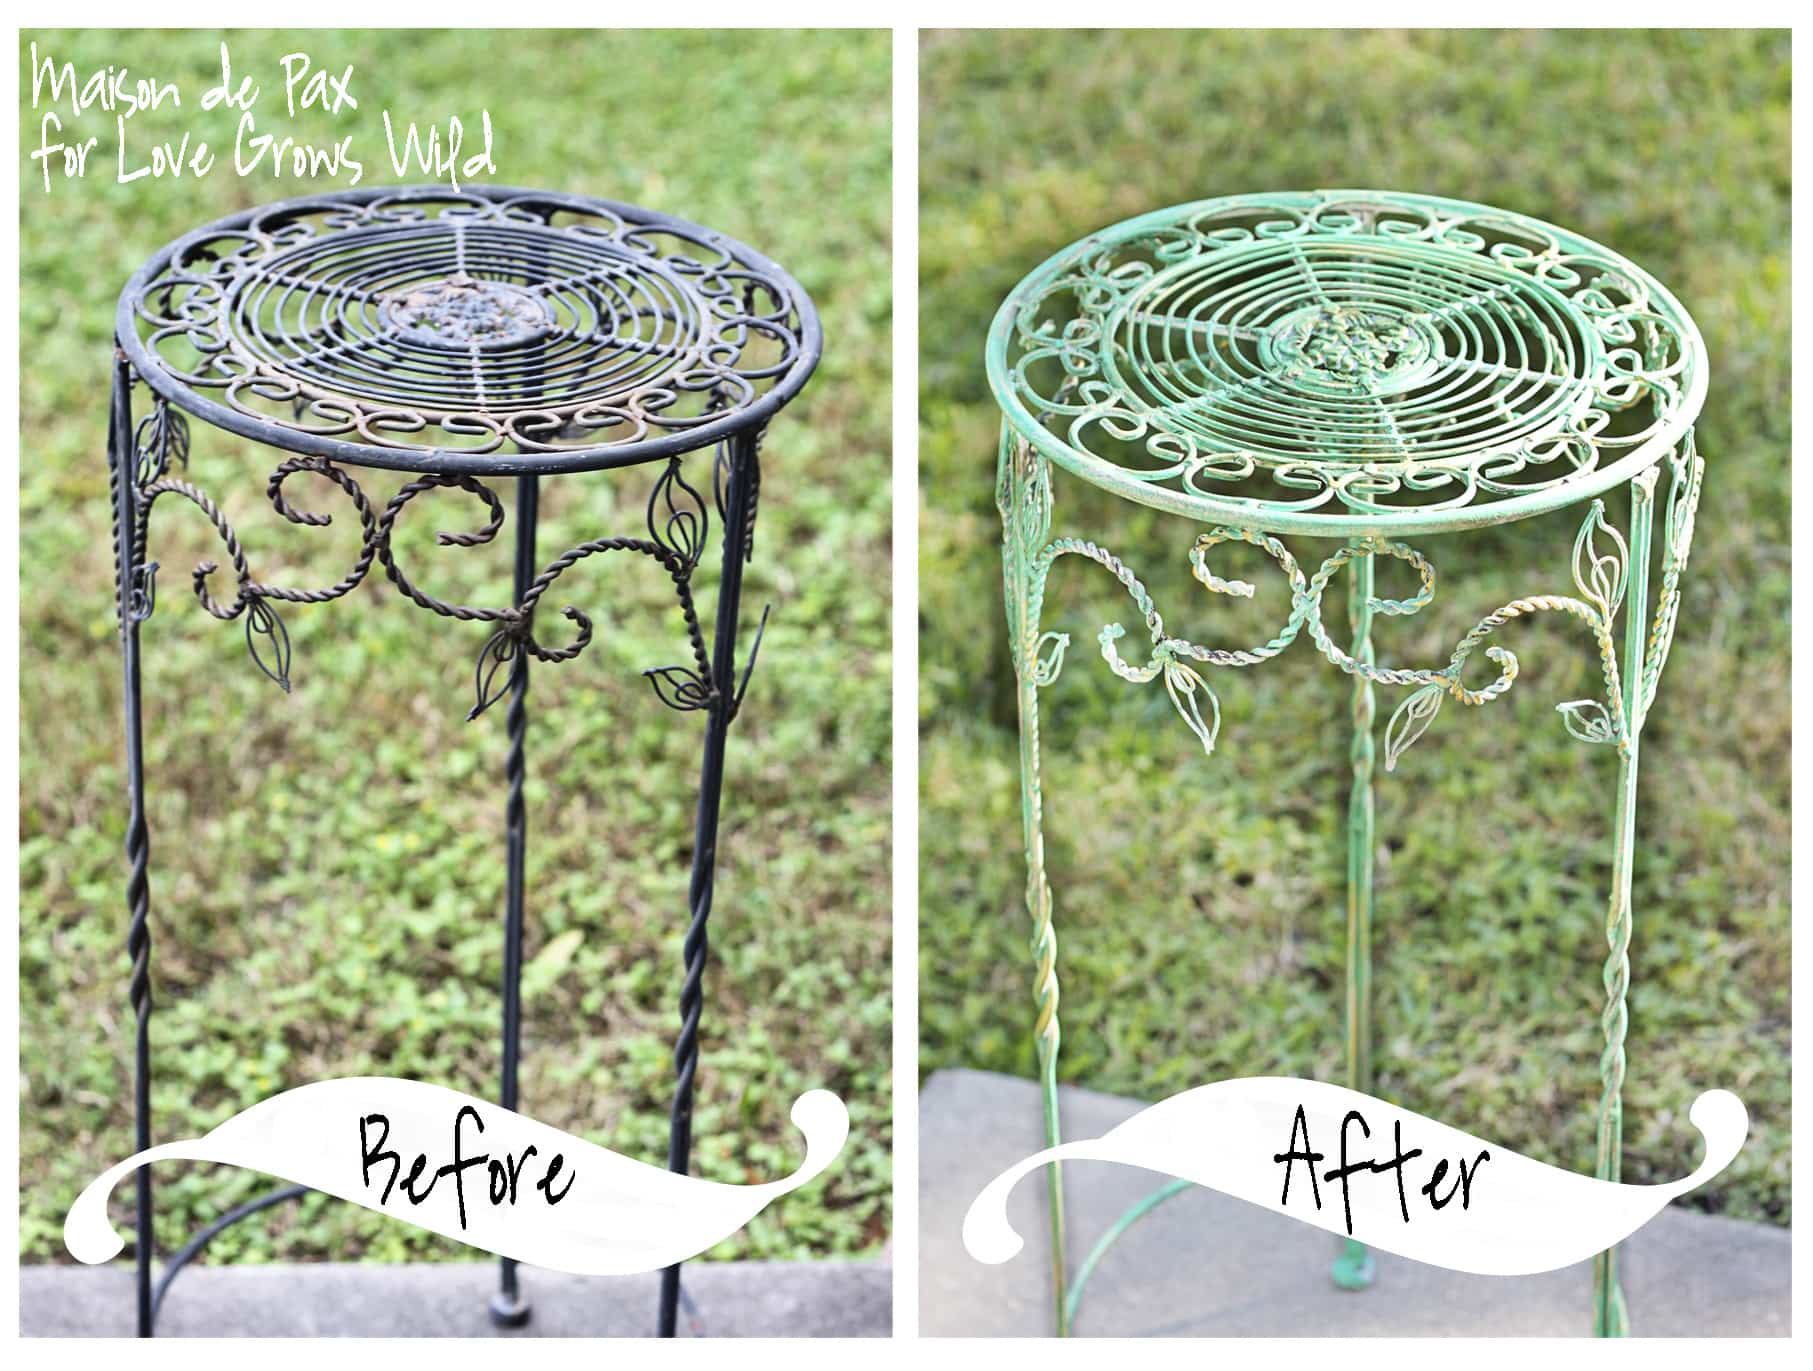 Learn how to achieve this gorgeous faux oxidized look at LoveGrowsWild.com